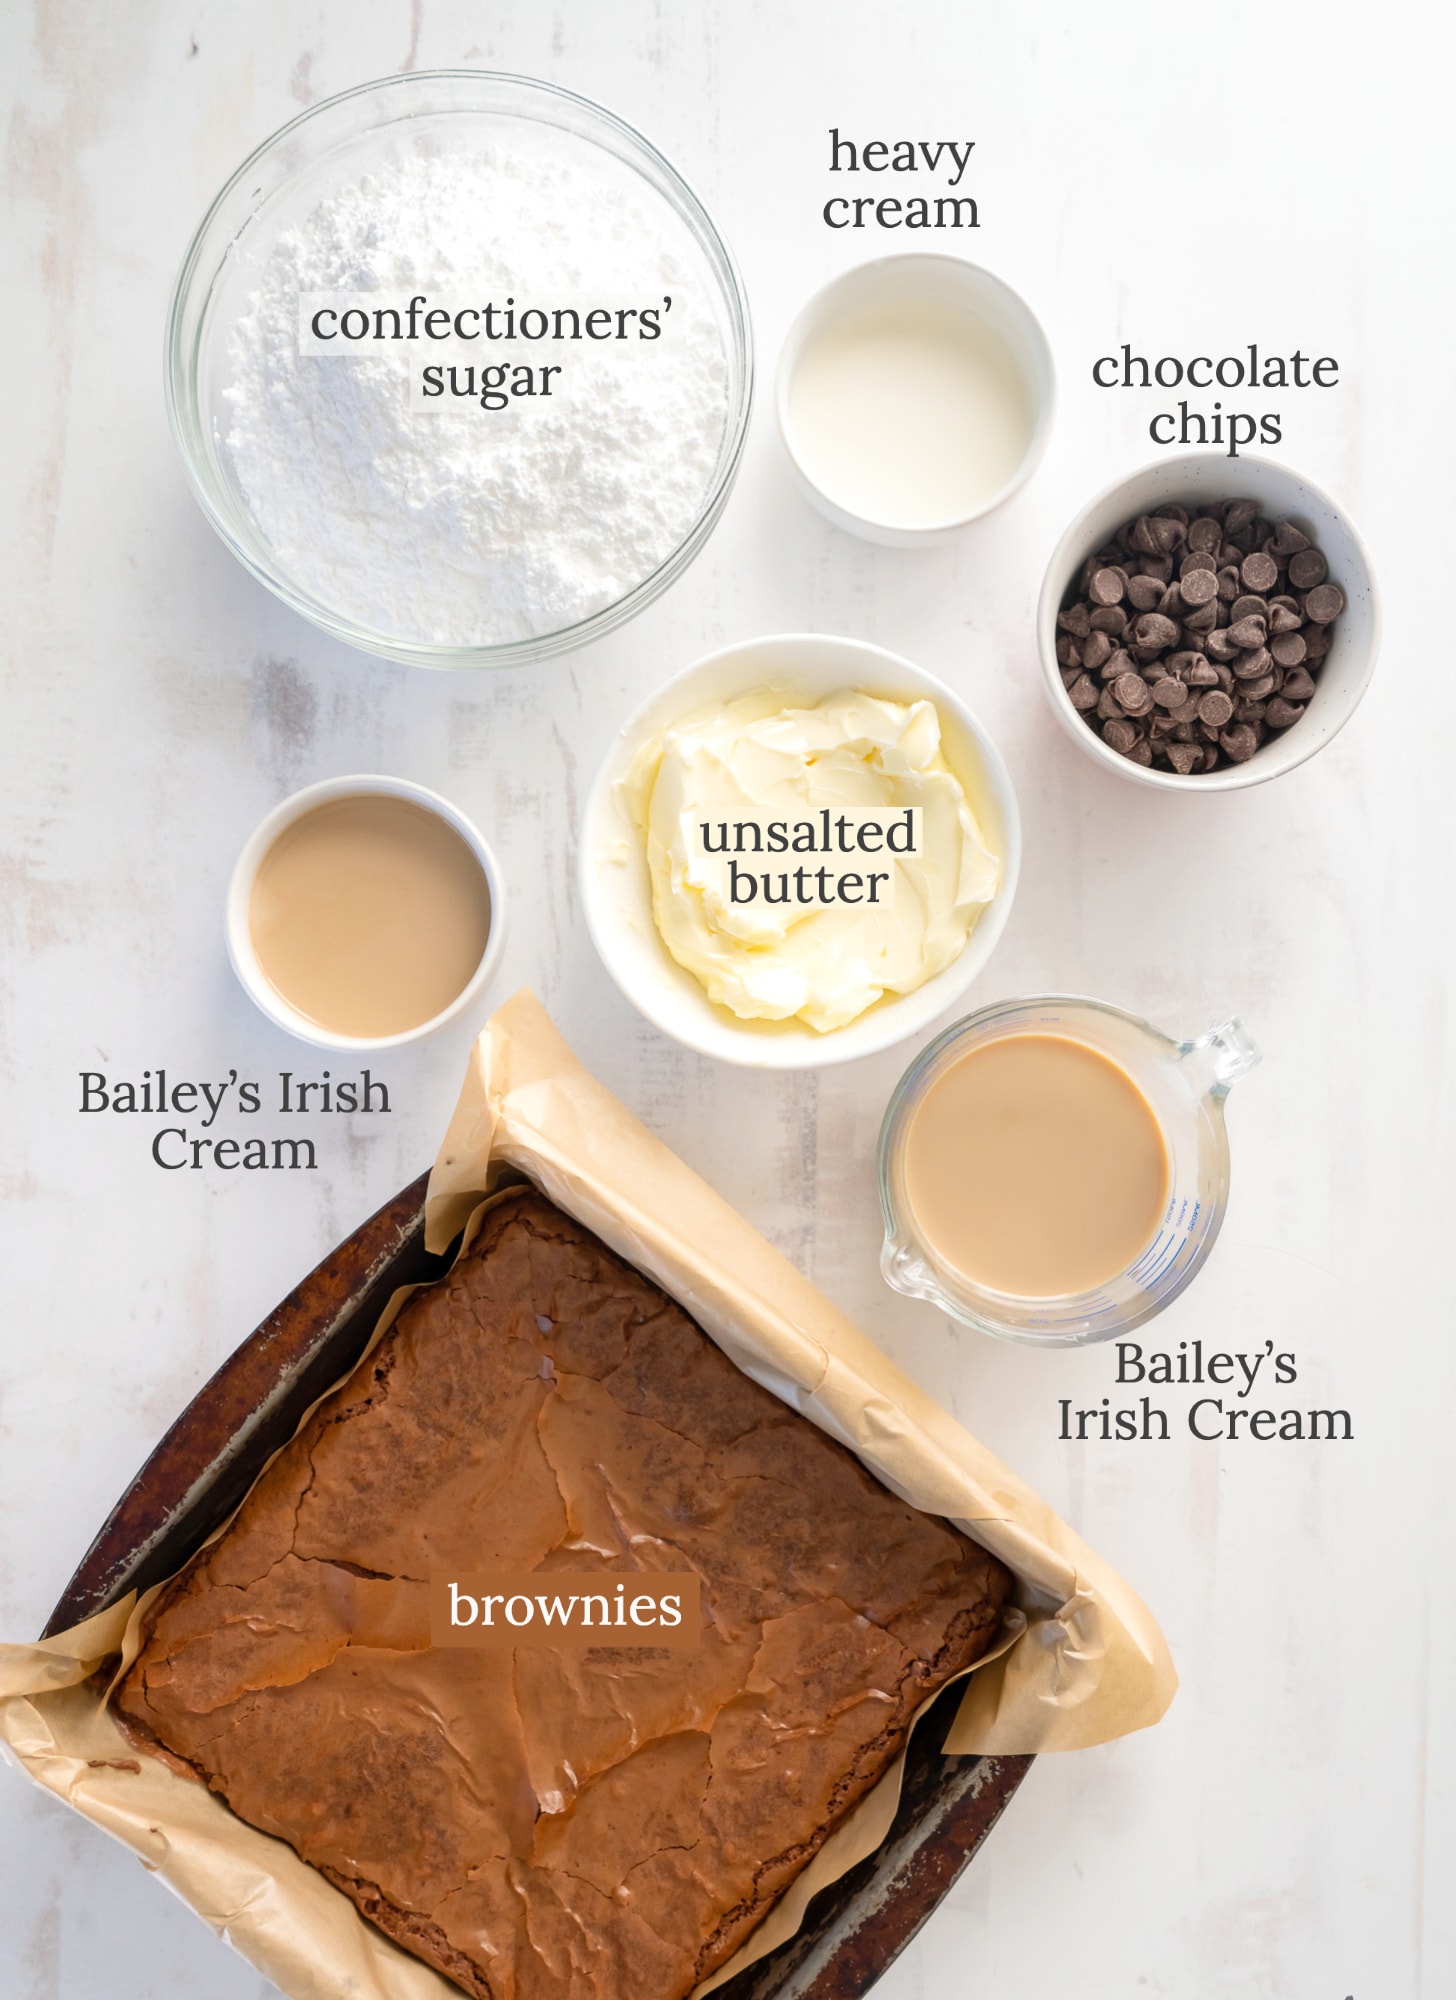 baileys brownies ingredients in bowls labeled with text.